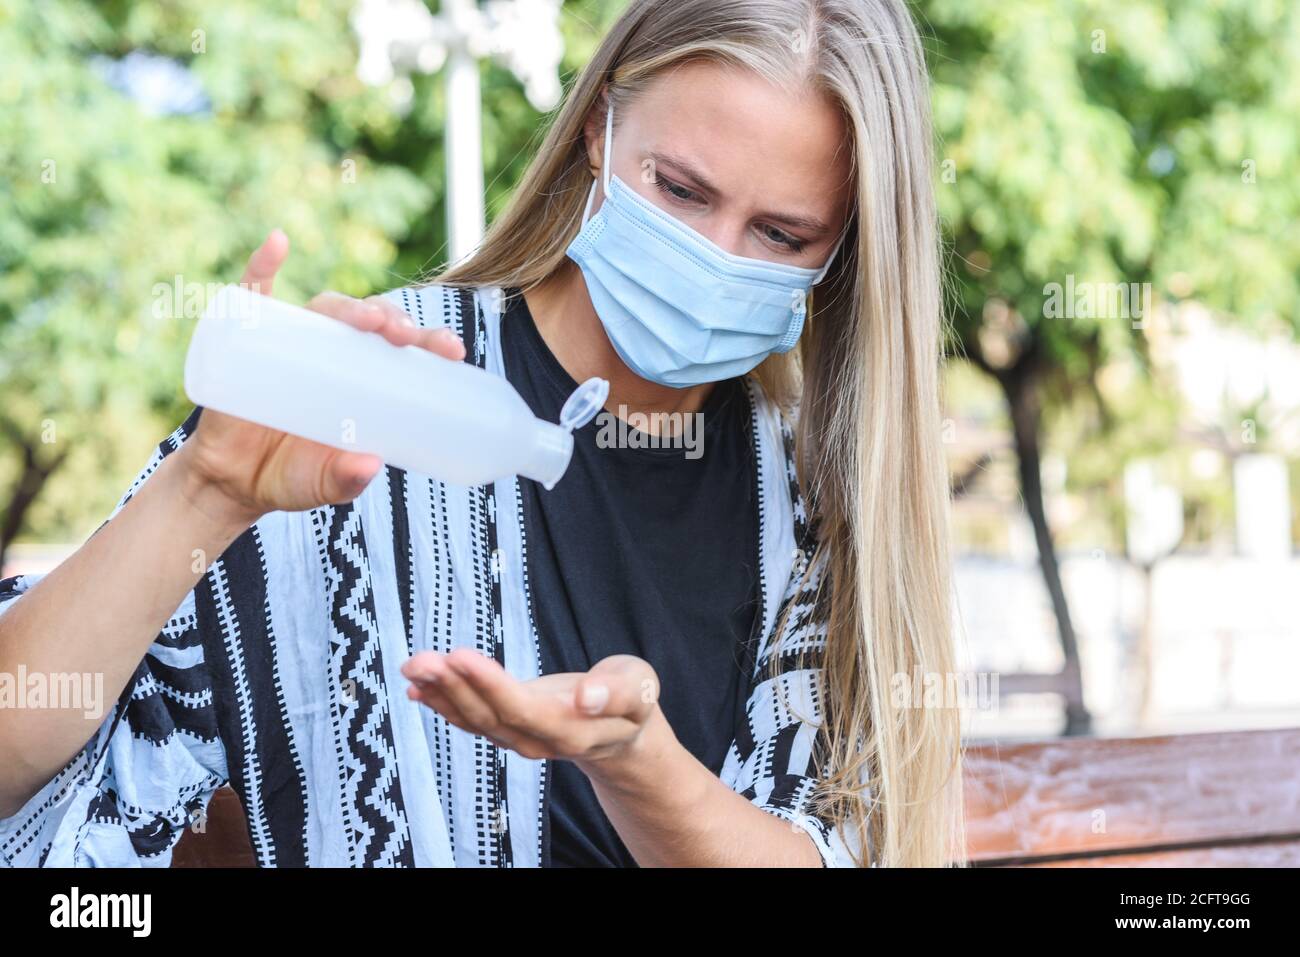 young caucasian blonde woman cleaning her hands with hydroalcoholic gel Stock Photo